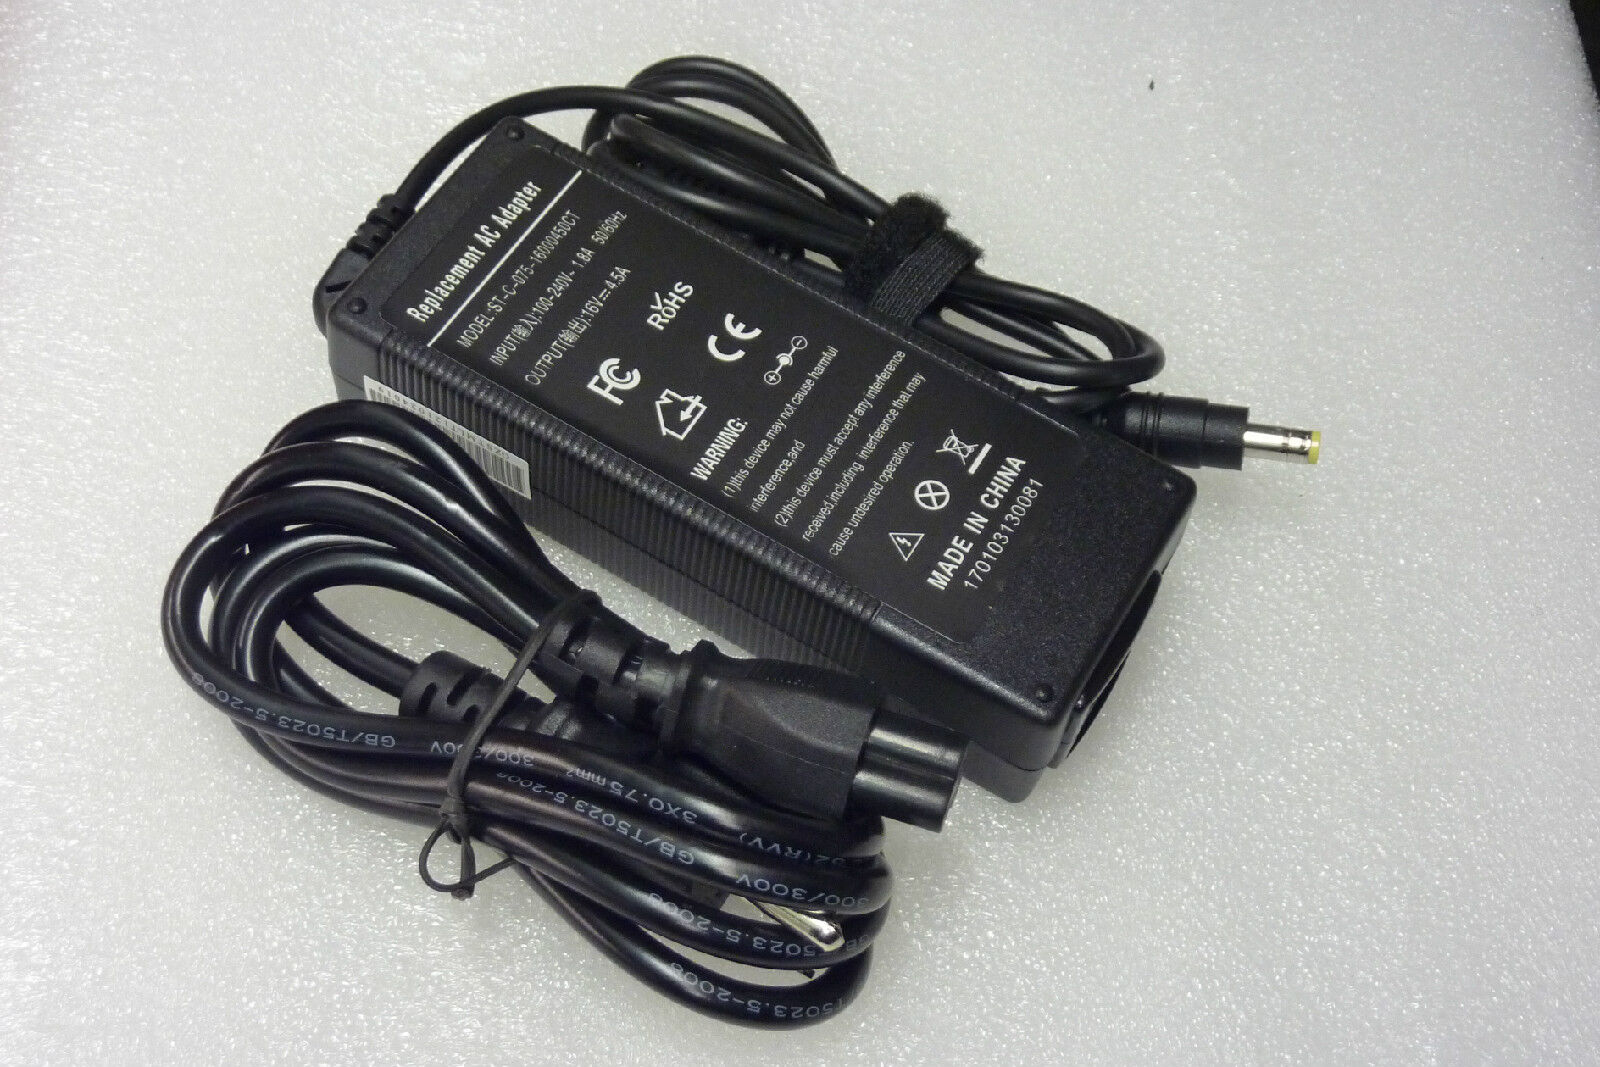 AC Adapter Cord Battery Charger For IBM Thinkpad T20 T21 T22 T23 Type 2647 2648